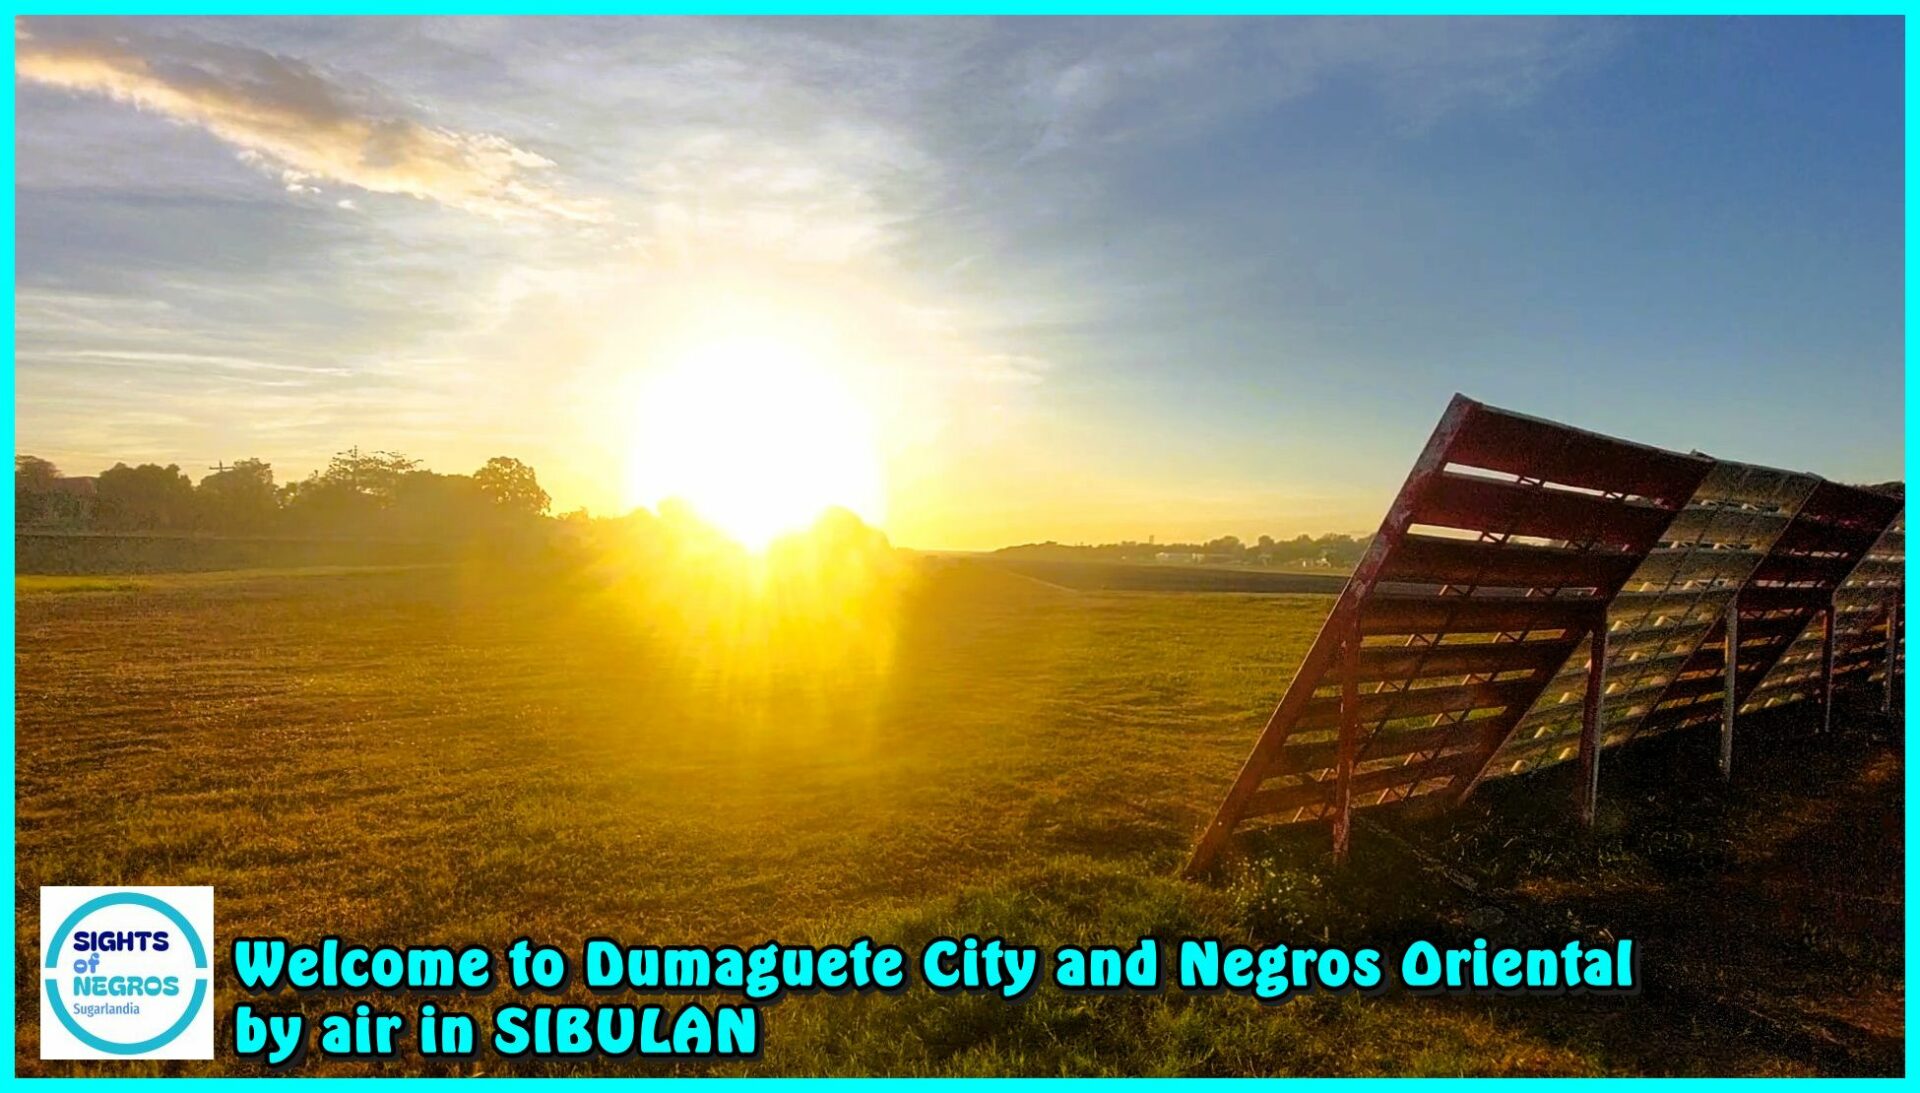 SIGHTS OF NEGROS - PHOTO OF THE DAY - Gateway to Negros Oriental by air